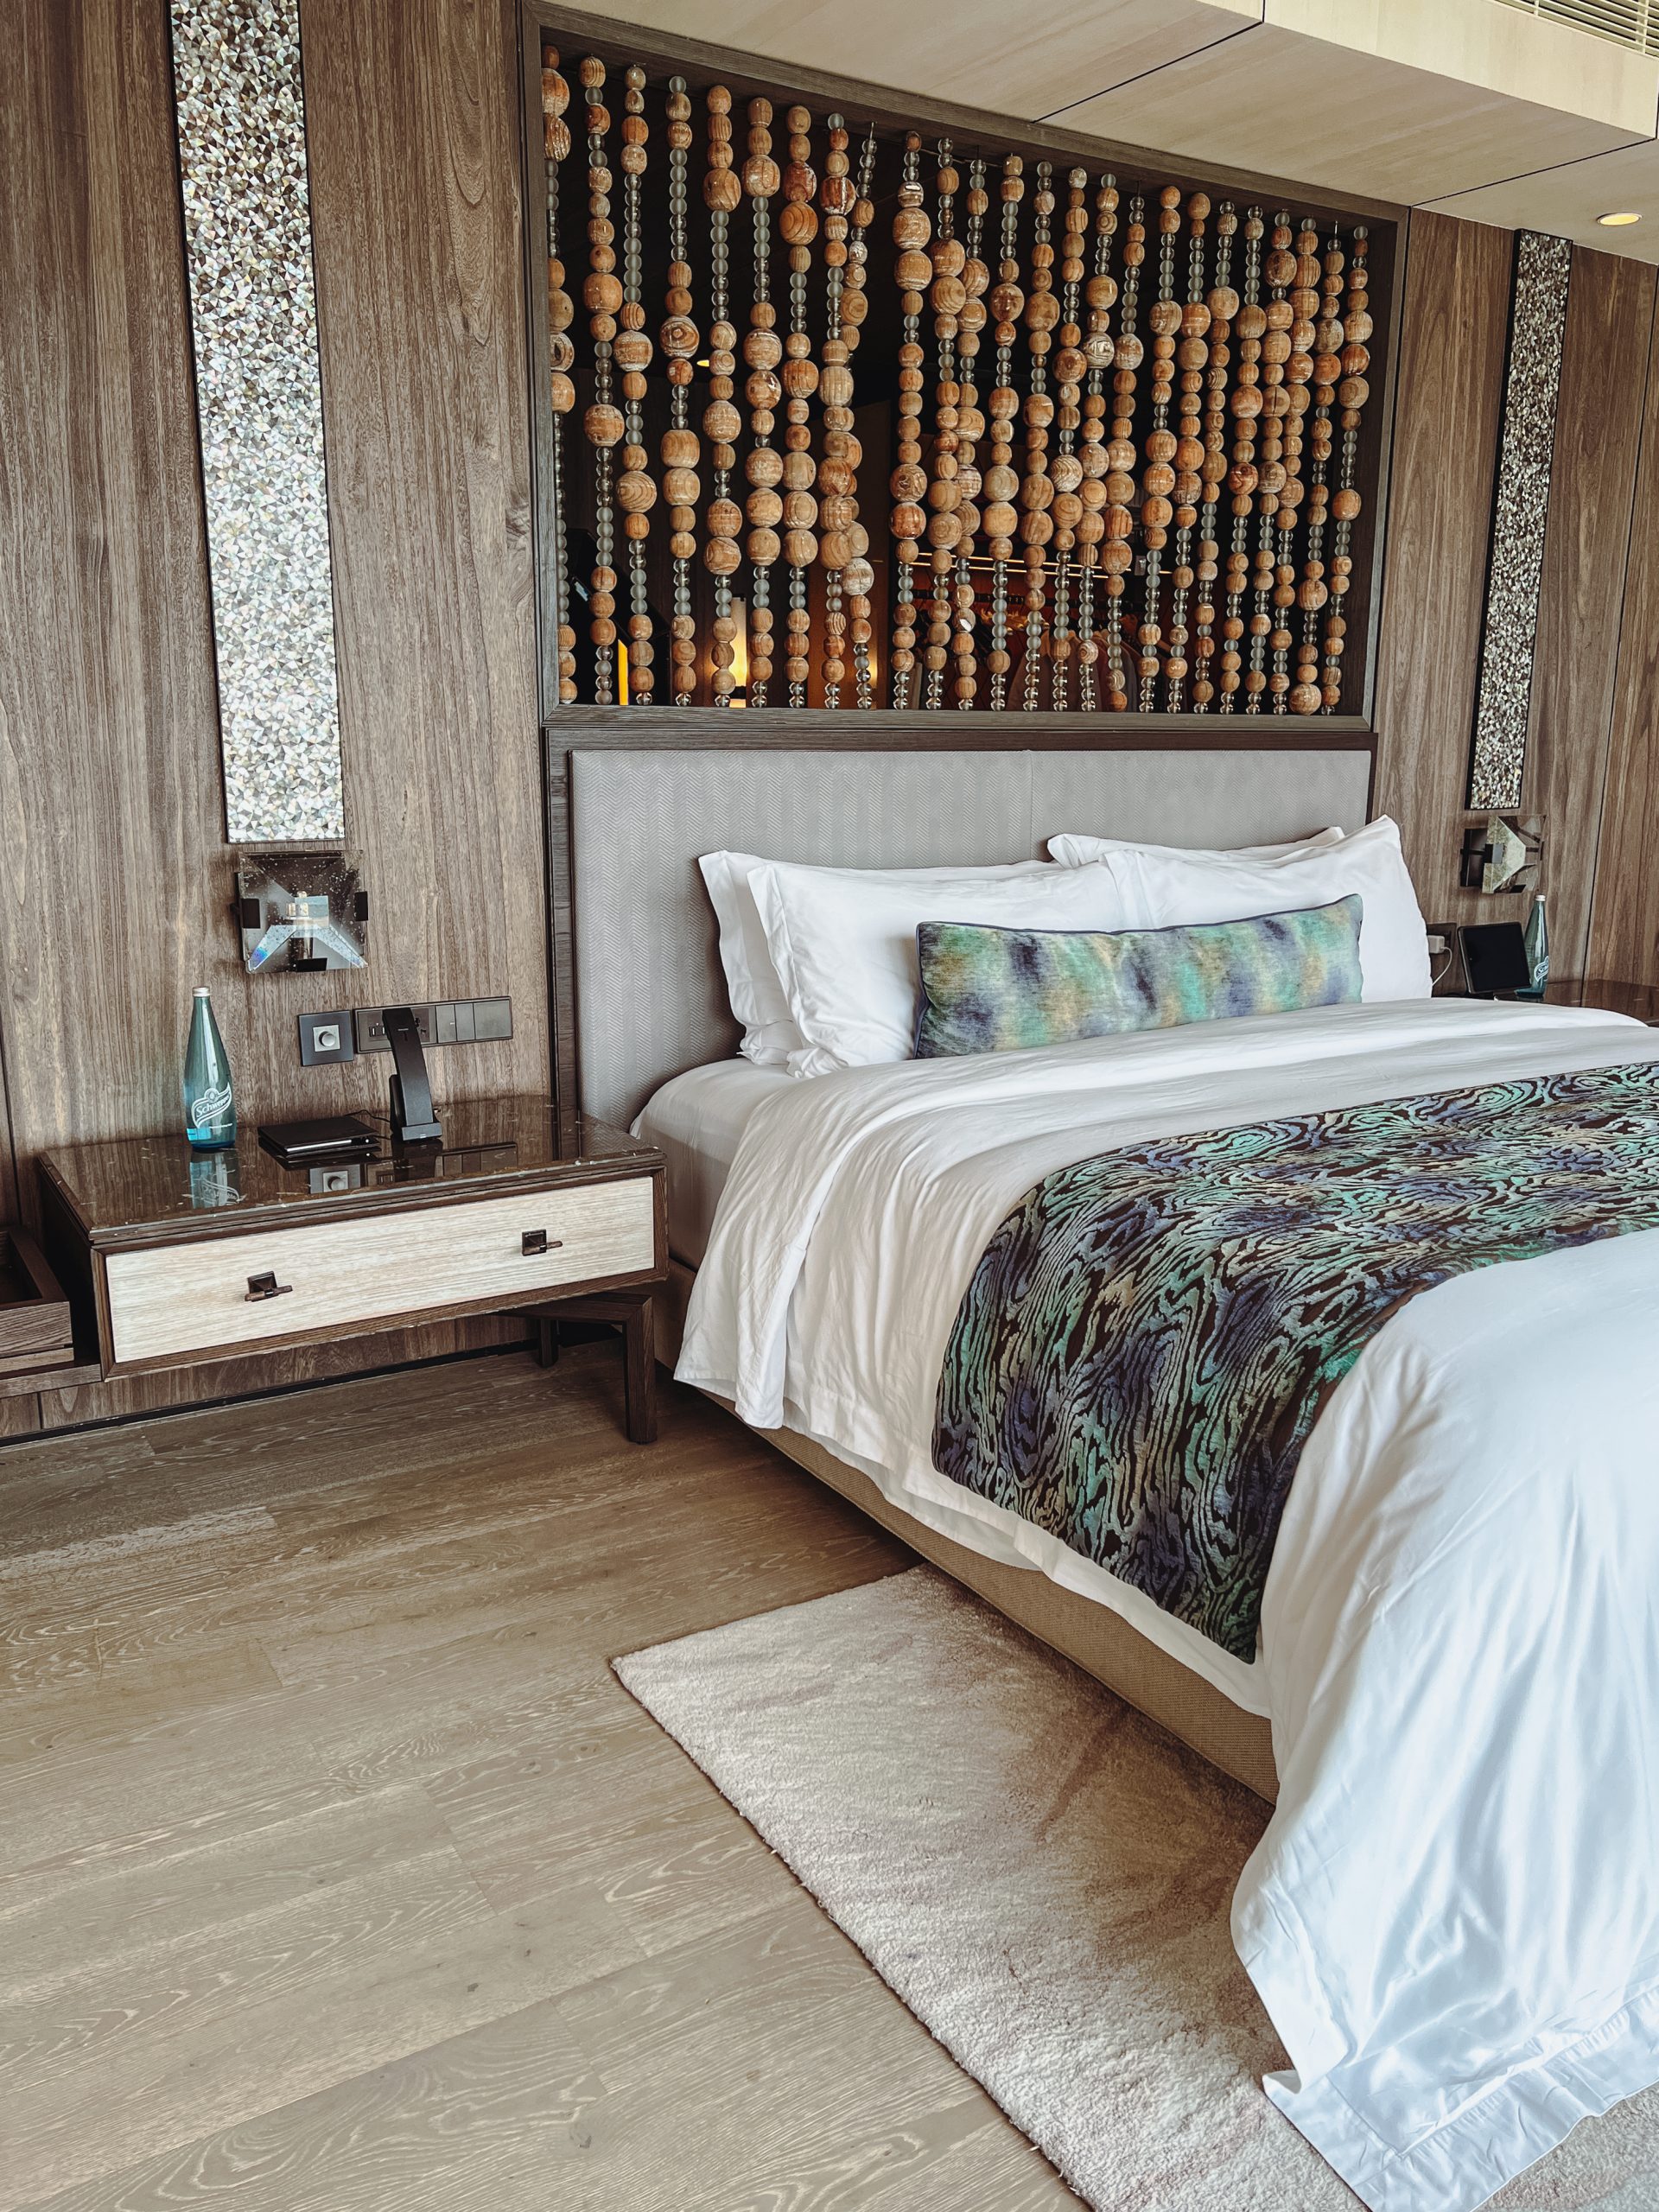 a bed with a wooden headboard and a nightstand